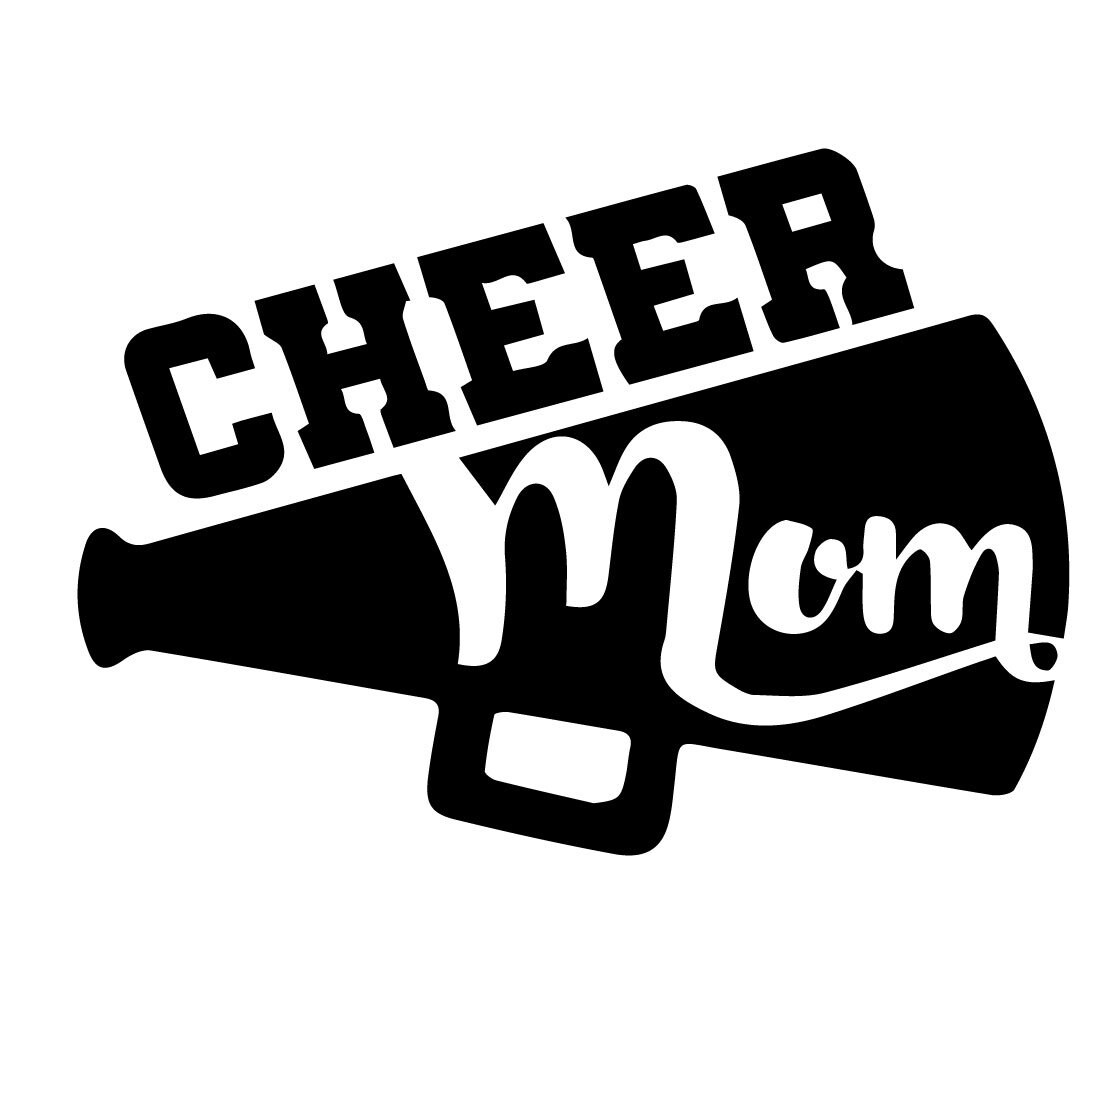 Cheer Mom Vinyl Decal Car Decal Decals Yeti Decal RTIC | Etsy